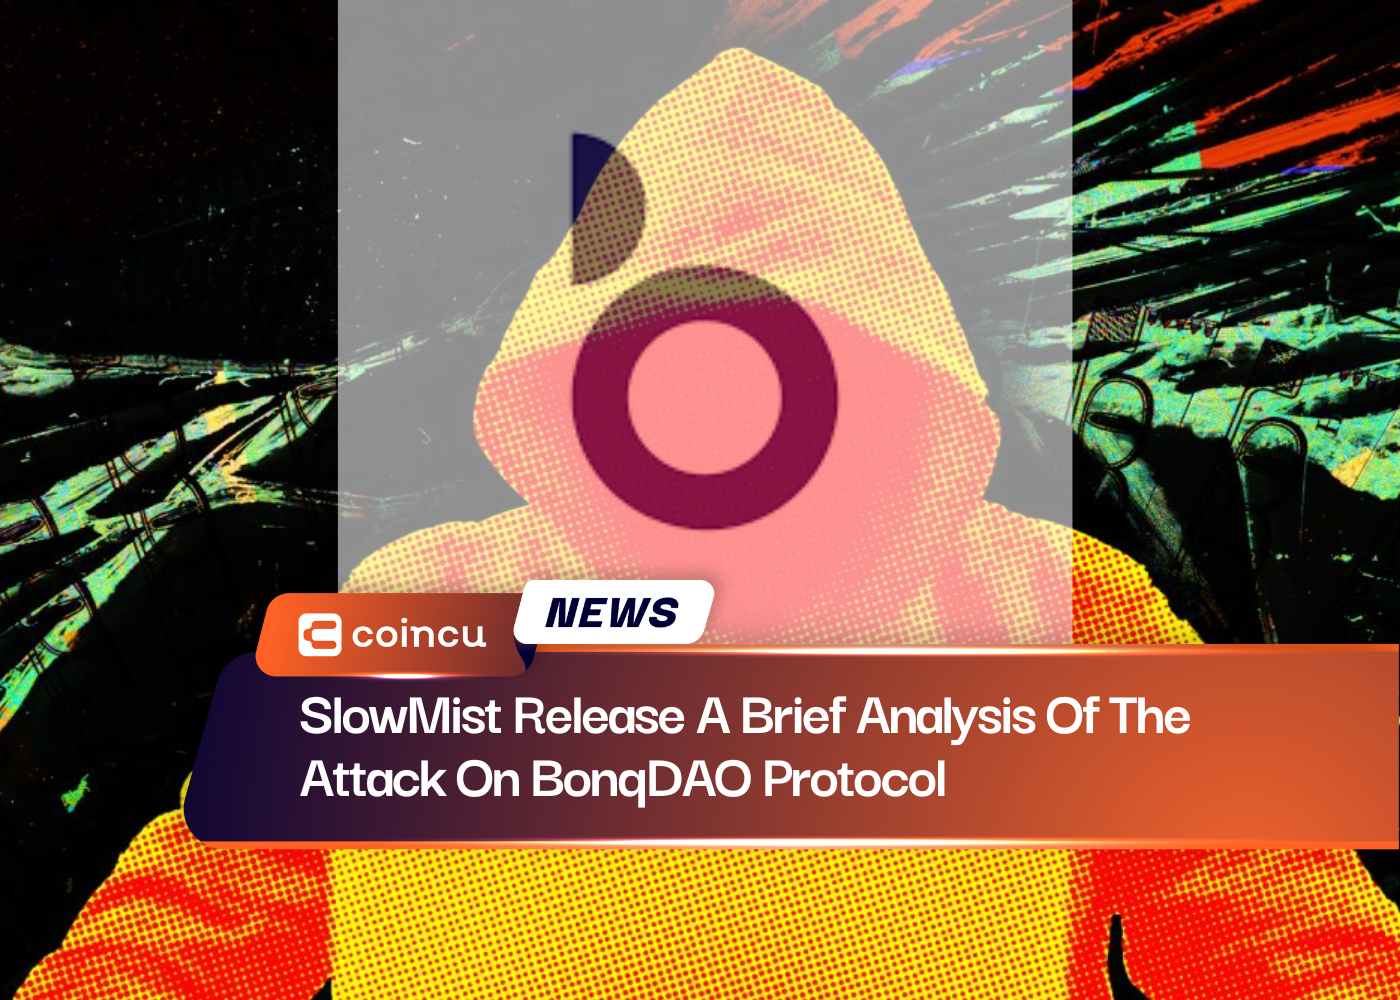 SlowMist Release A Brief Analysis Of The Attack On BonqDAO Protocol